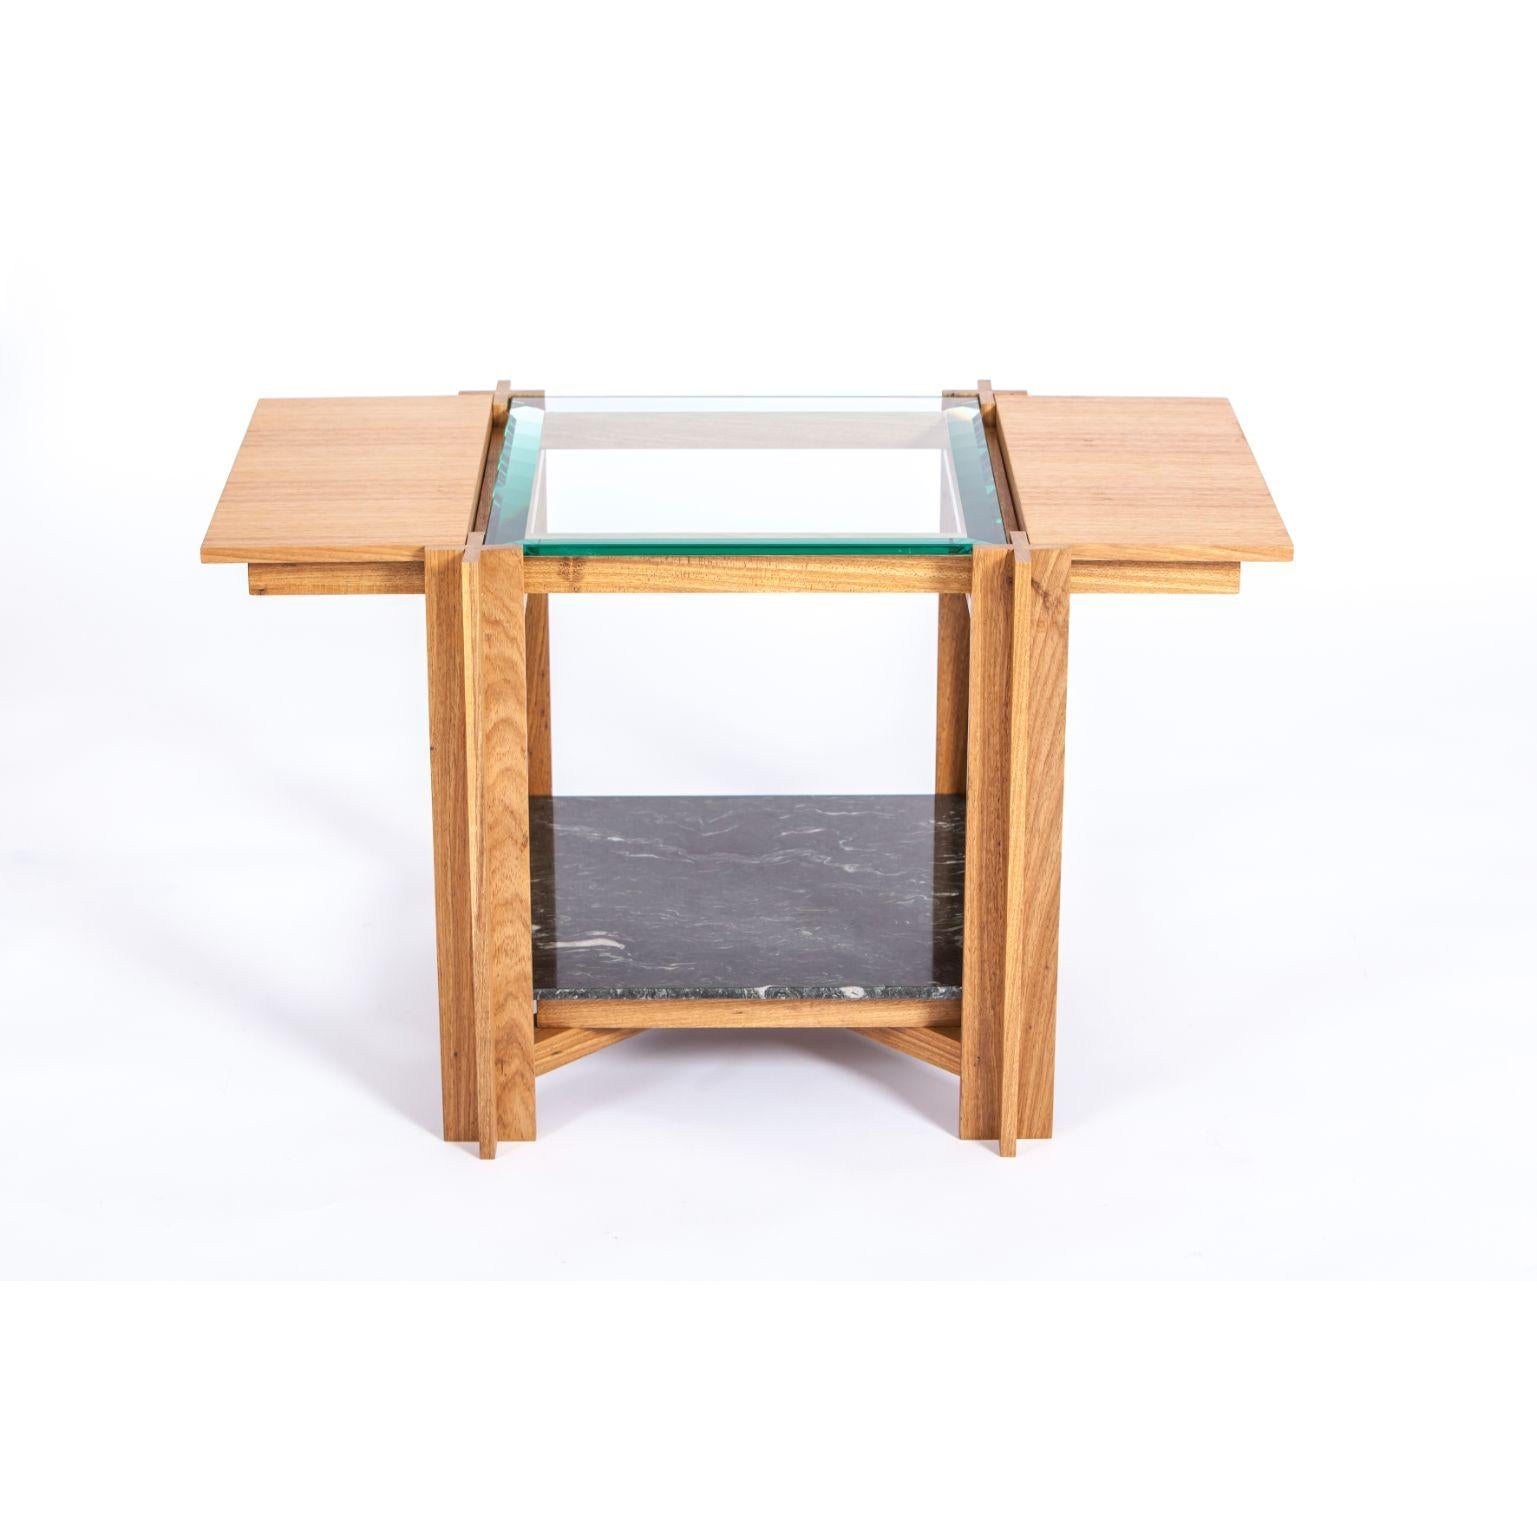 Modern Mais, Light Freijo Table with Tabs, by Alva Design For Sale